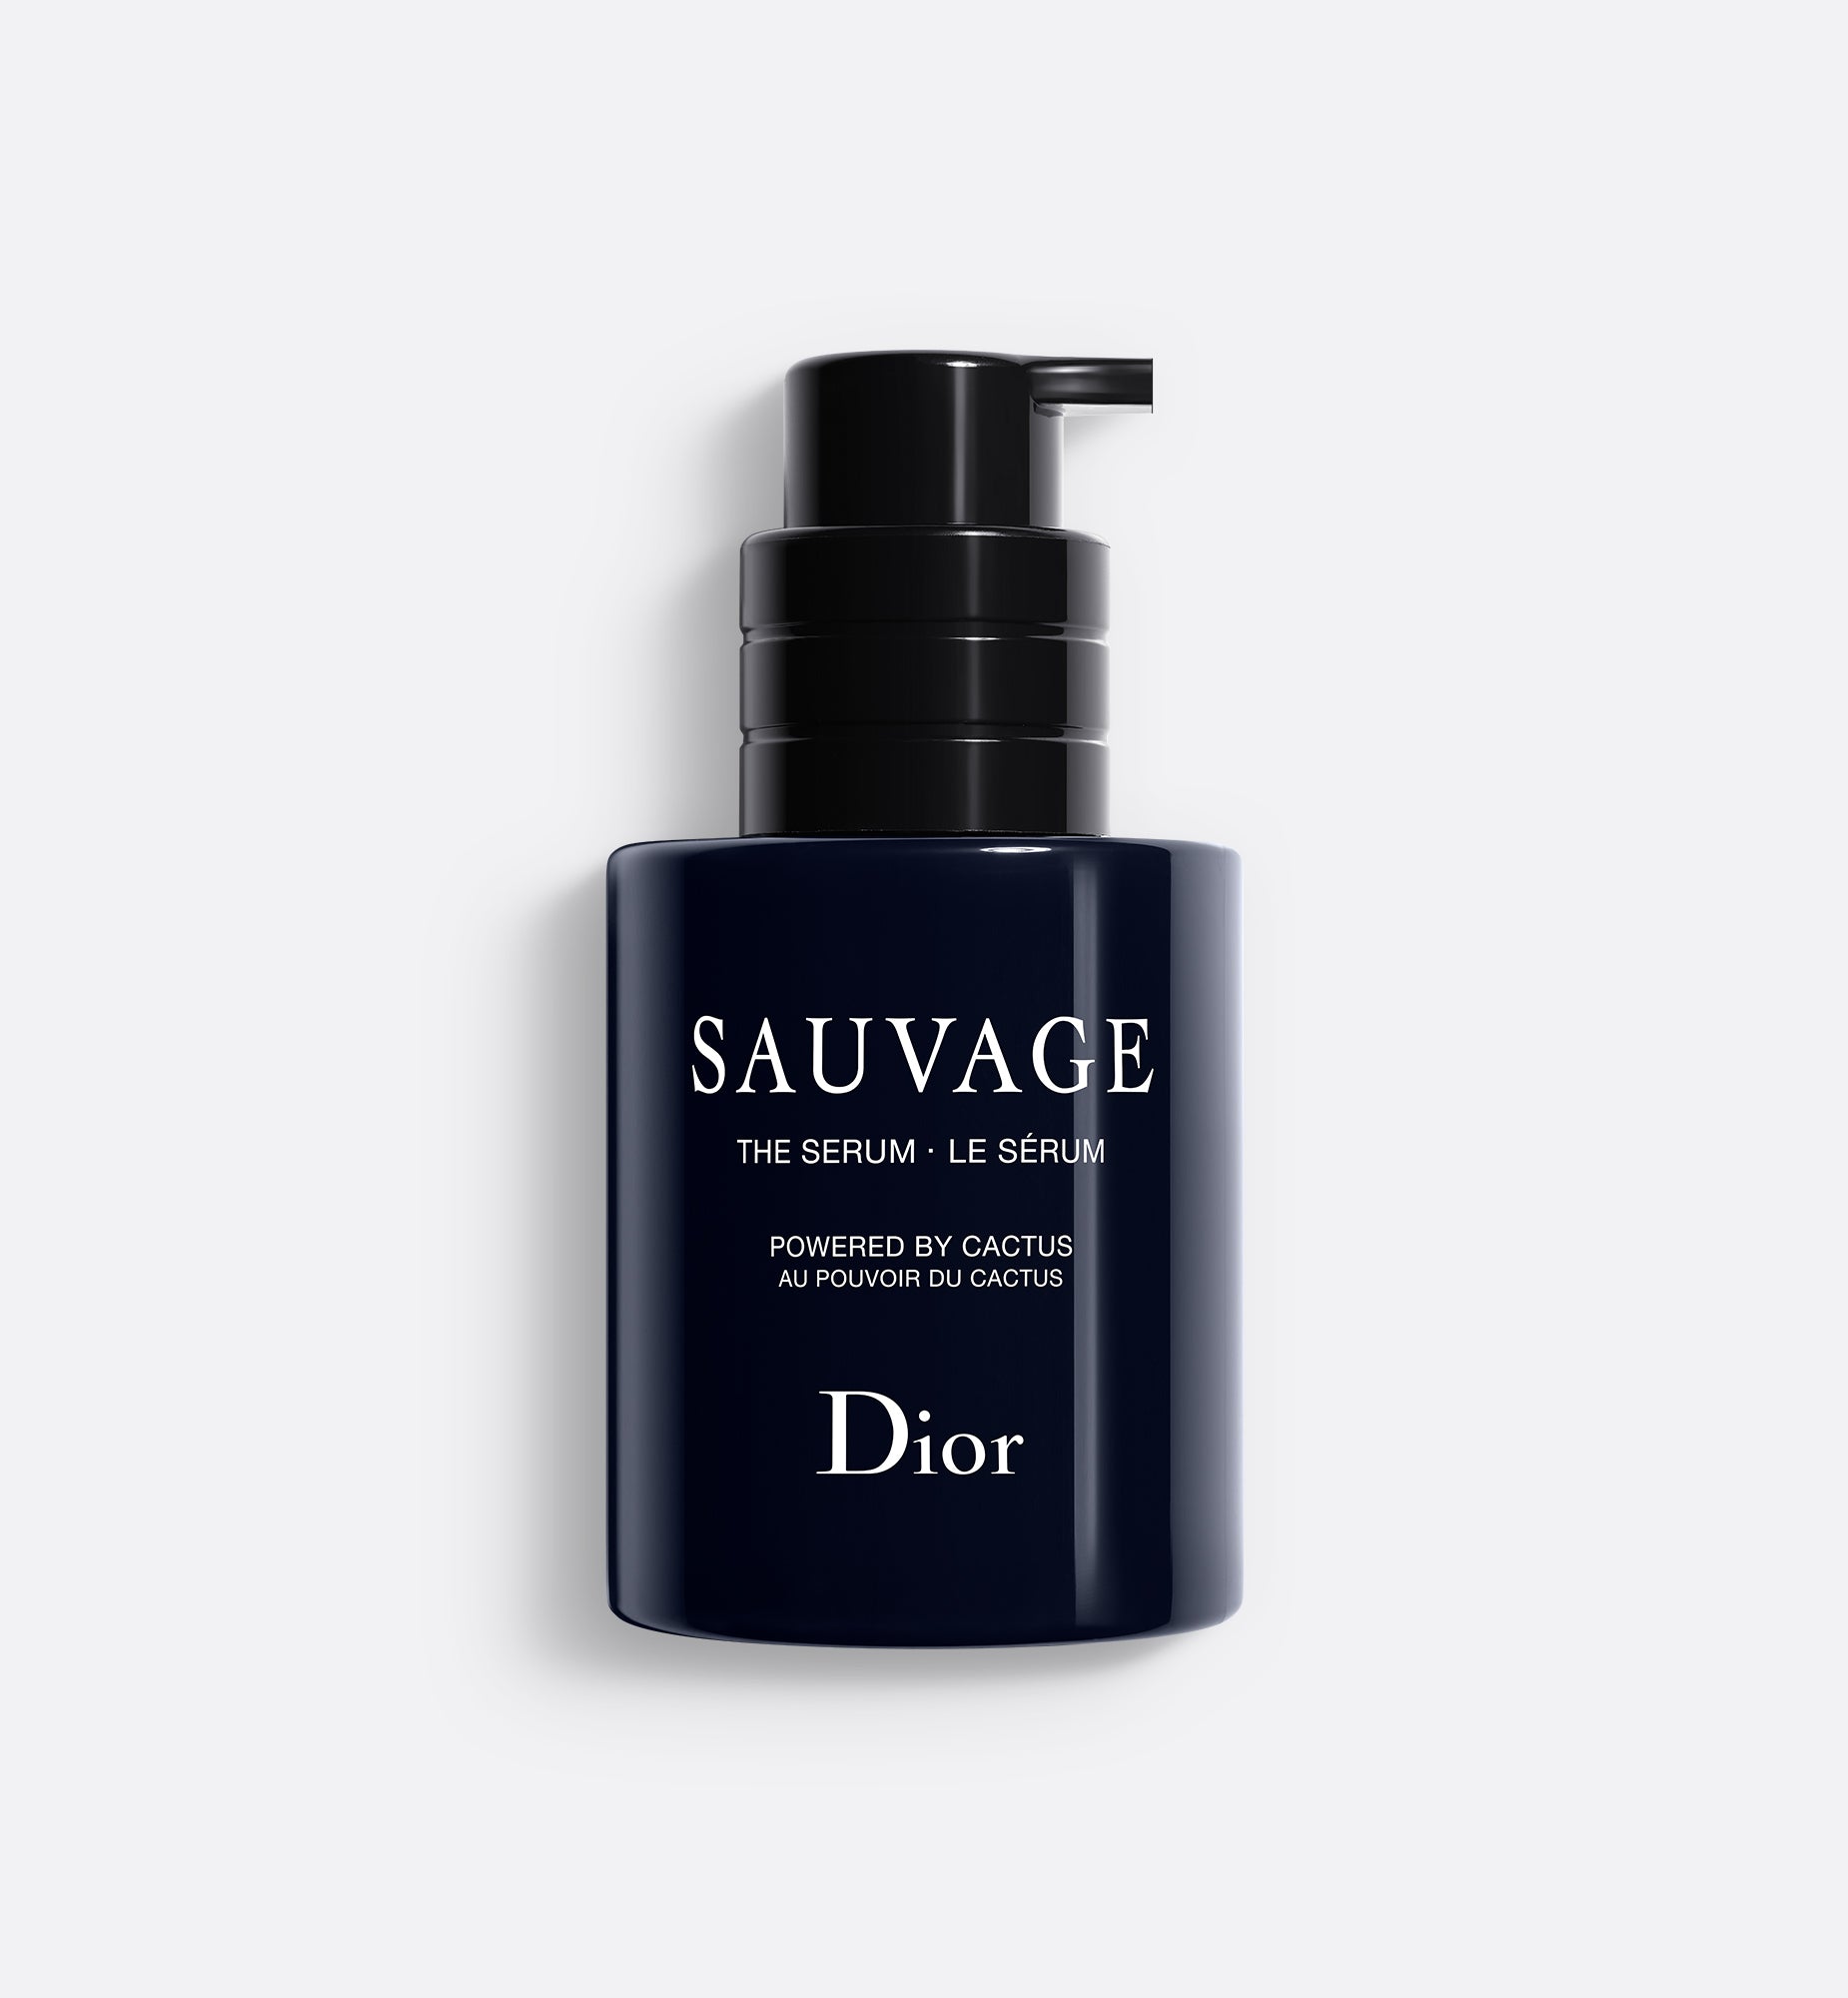 Sauvage: the world of the iconic Dior fragrance for men | Dior